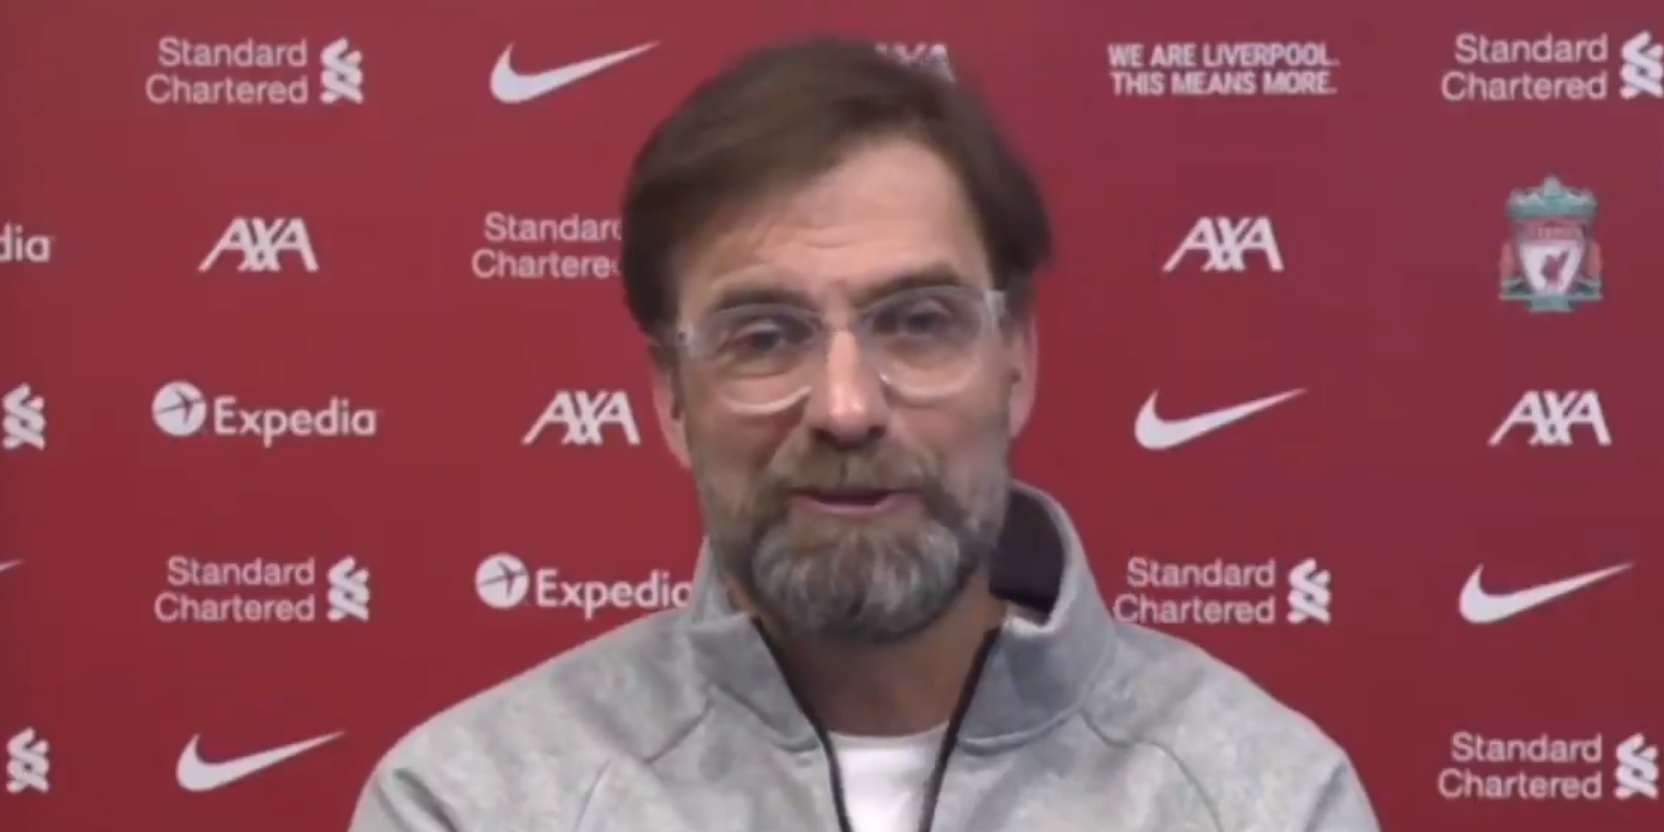 (Video) Klopp rubbishes reports of in-fighting in Liverpool squad